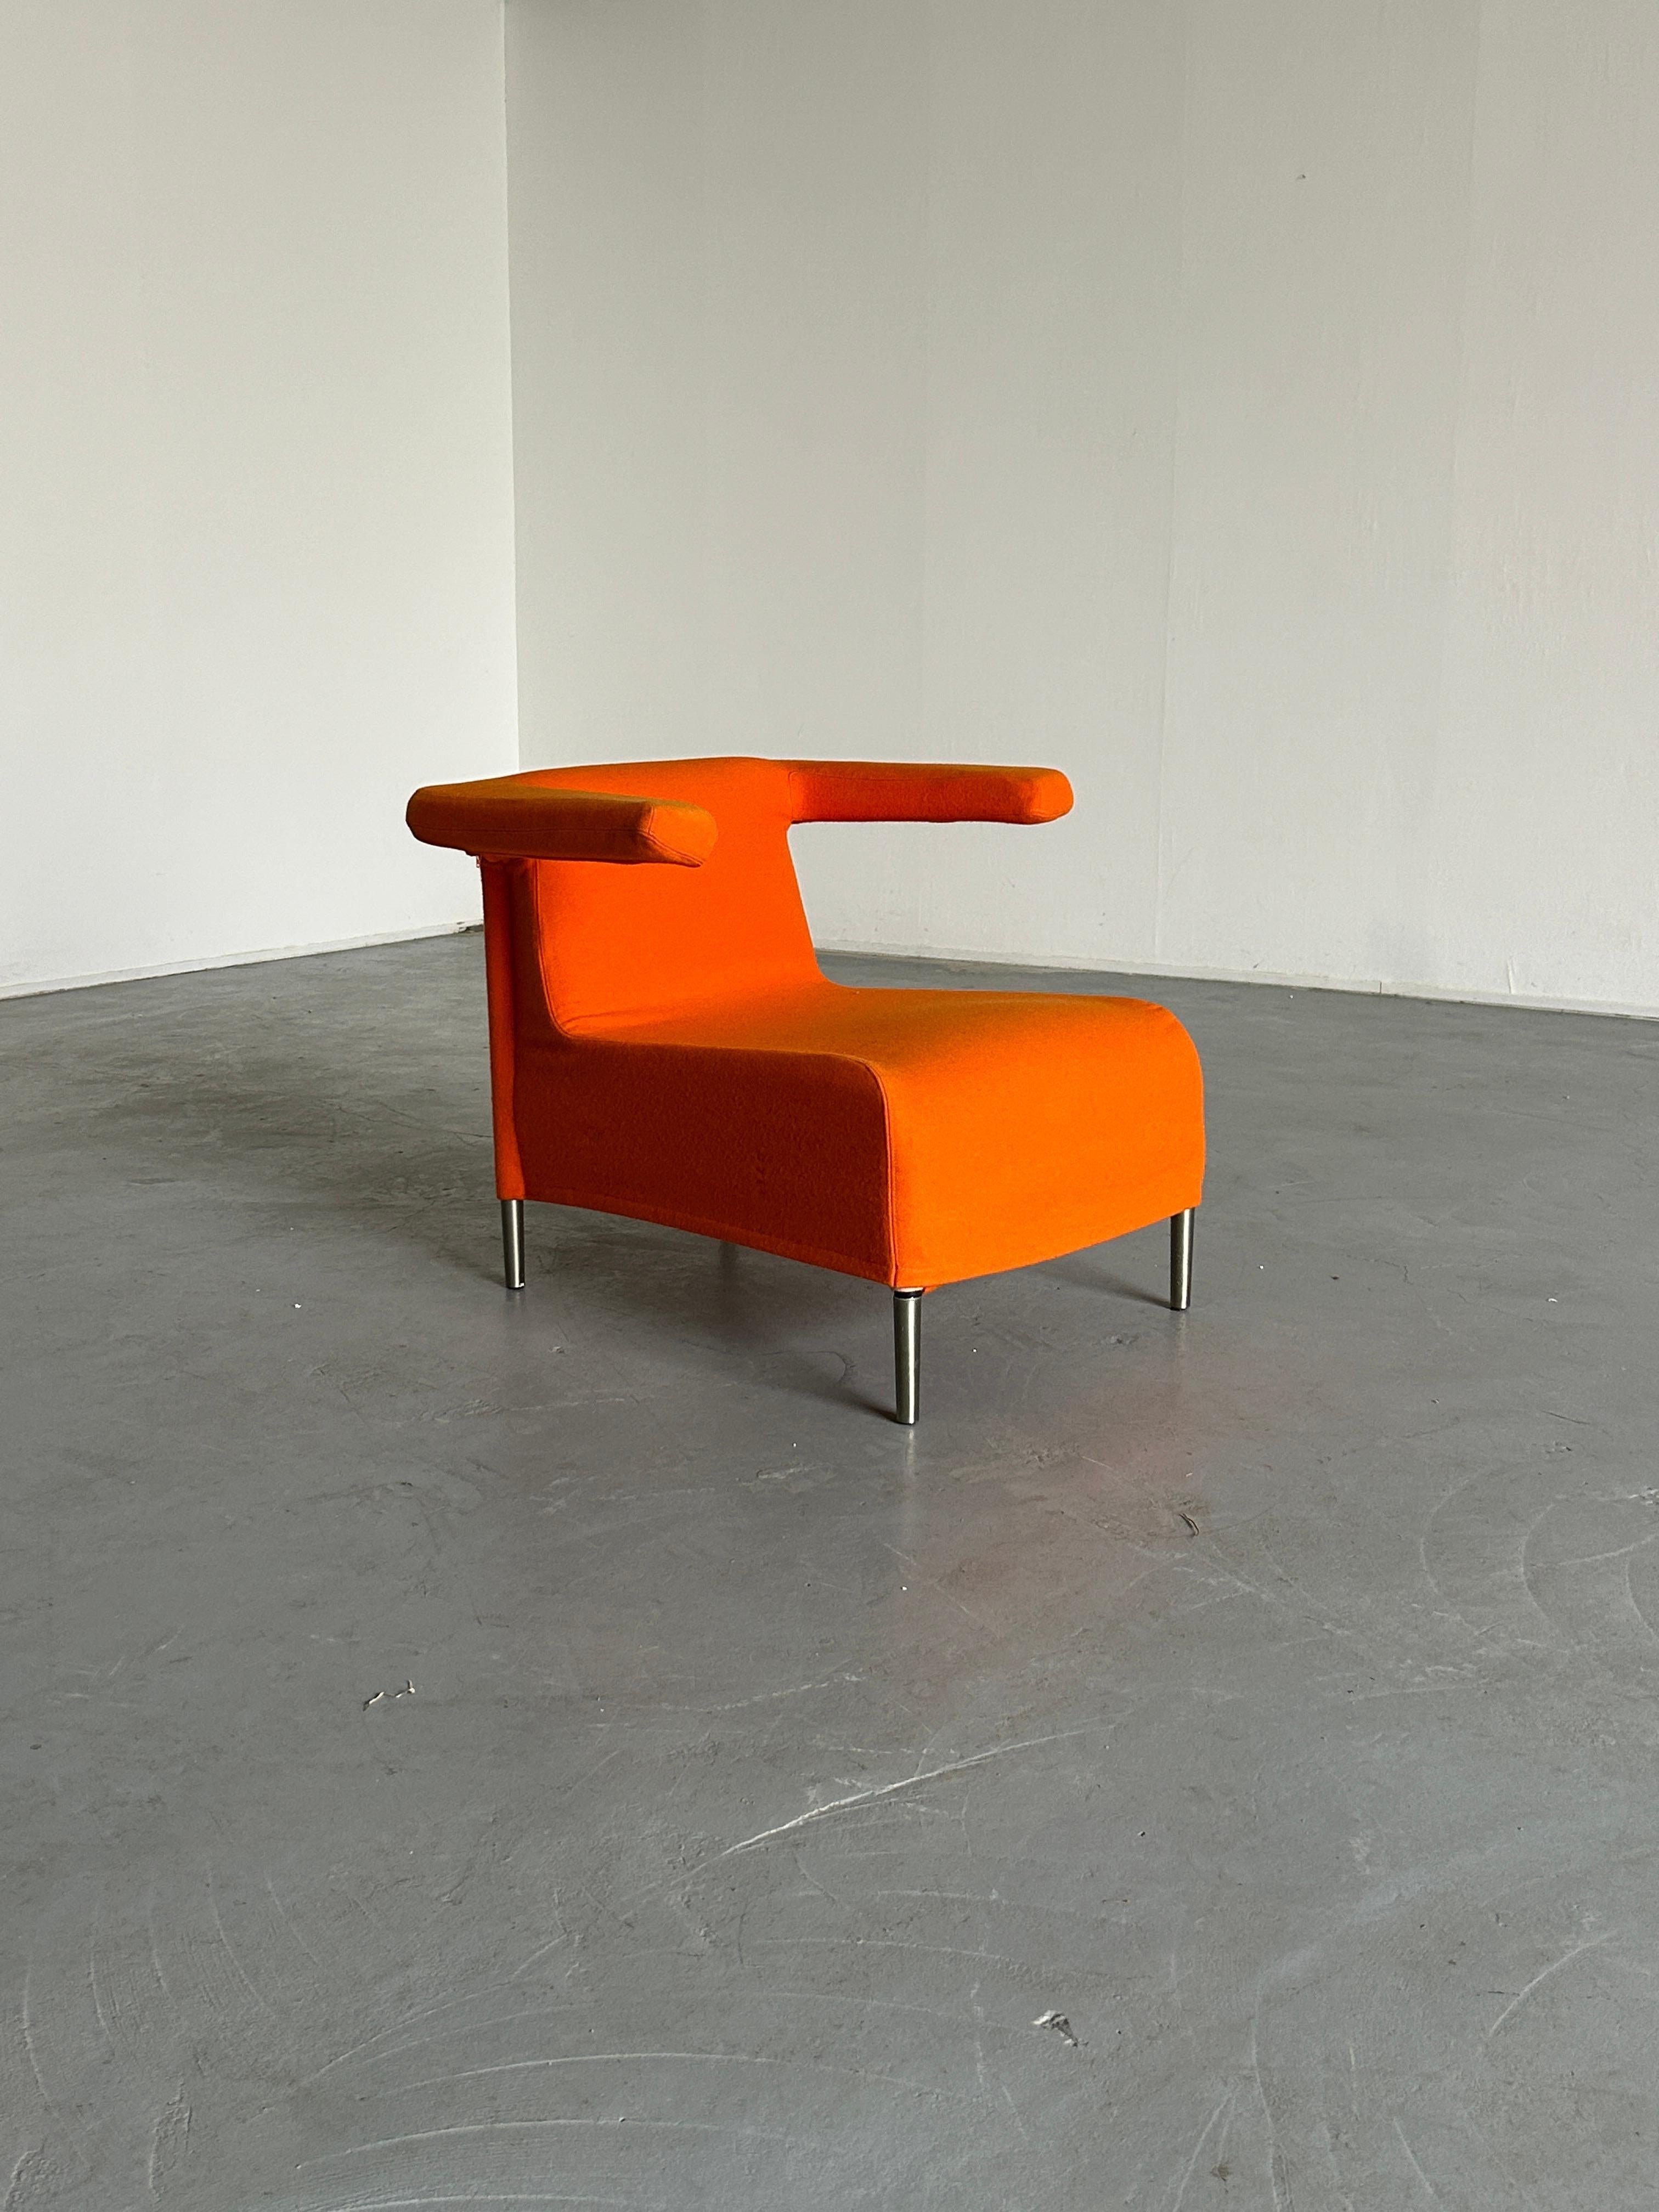 A Memphis-influenced 1990s 'Toribio' Armchair designed by Studio Lievore Altherr Molina for Italian manufacturer Verzelloni, produced in the late 1990s. 

Unique and eye-catching design.

Metal base with legs in matte nickle finish, high density